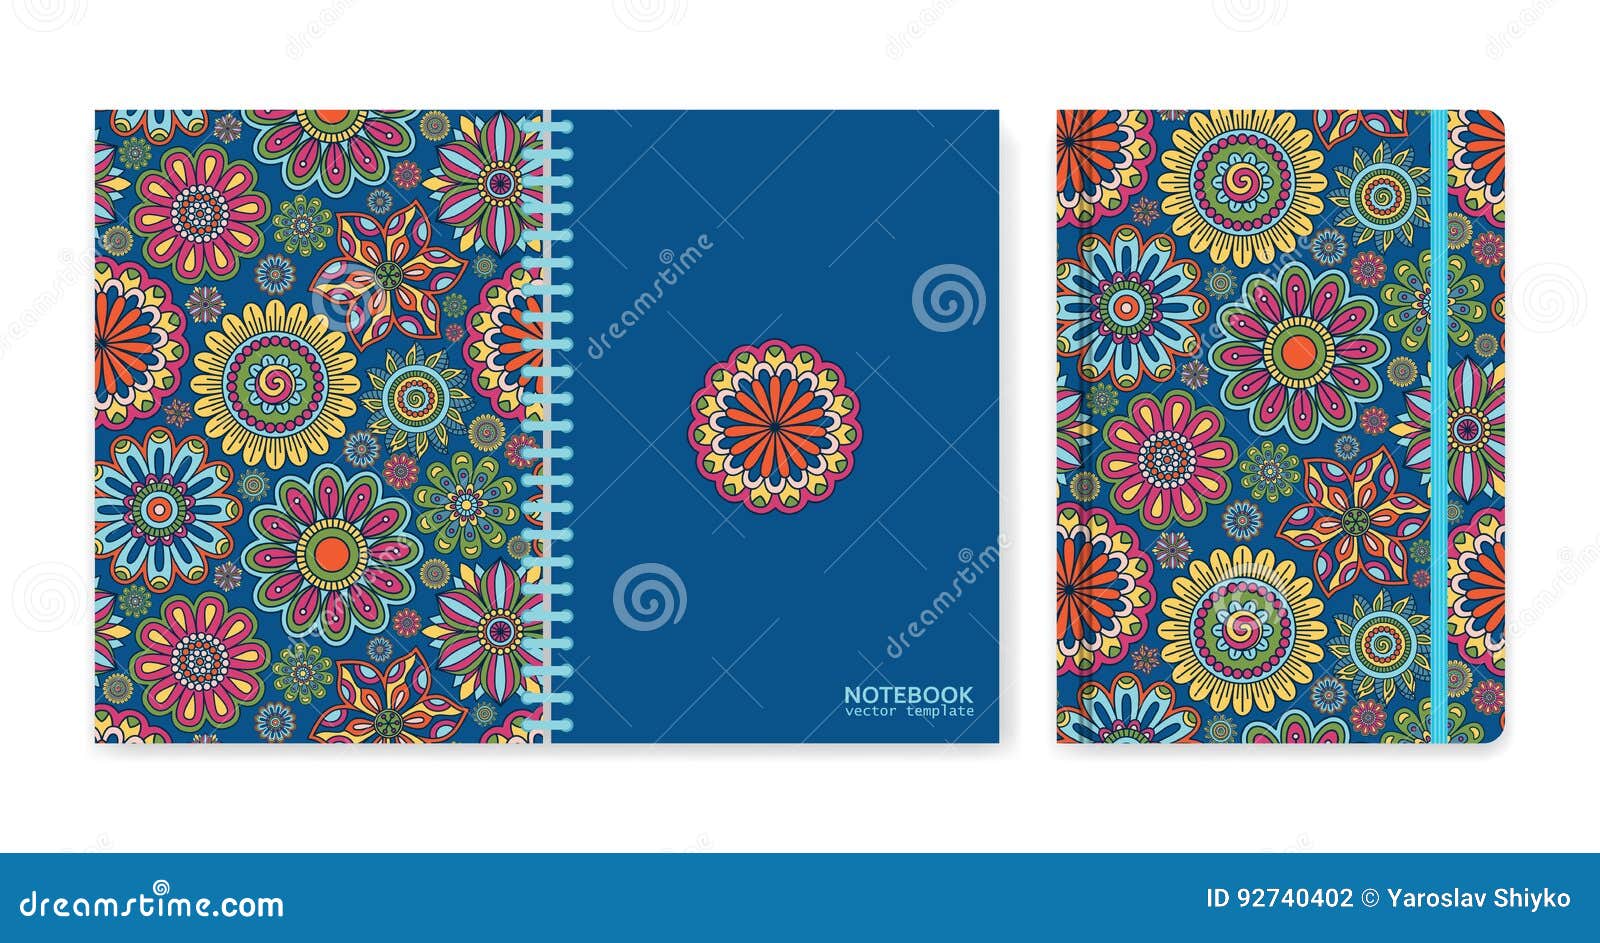 Beautiful notebook cover design template Vector Image